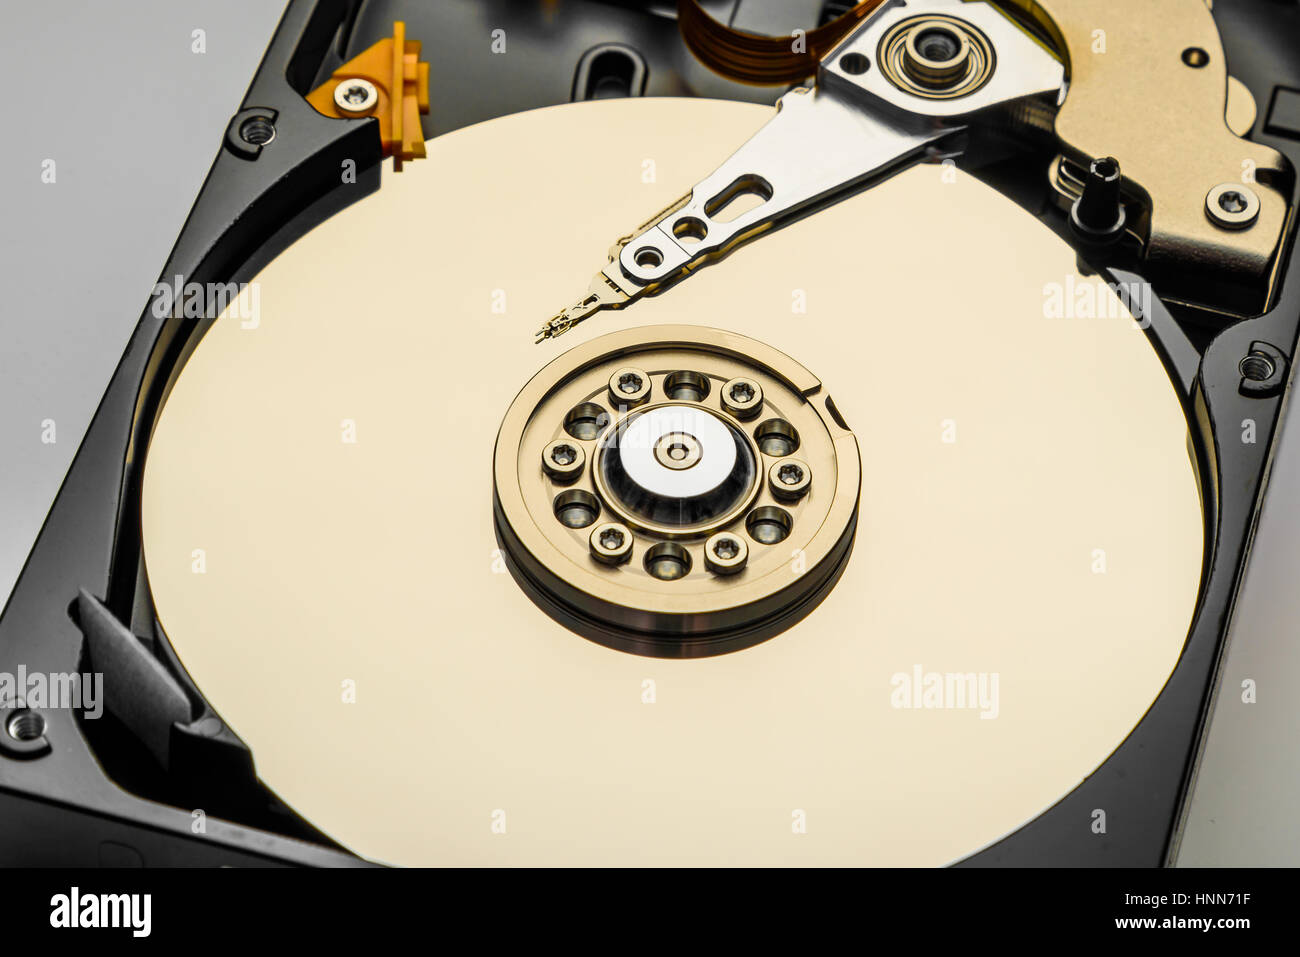 disassembled computer hard disk in gold color closeup isolated Stock Photo